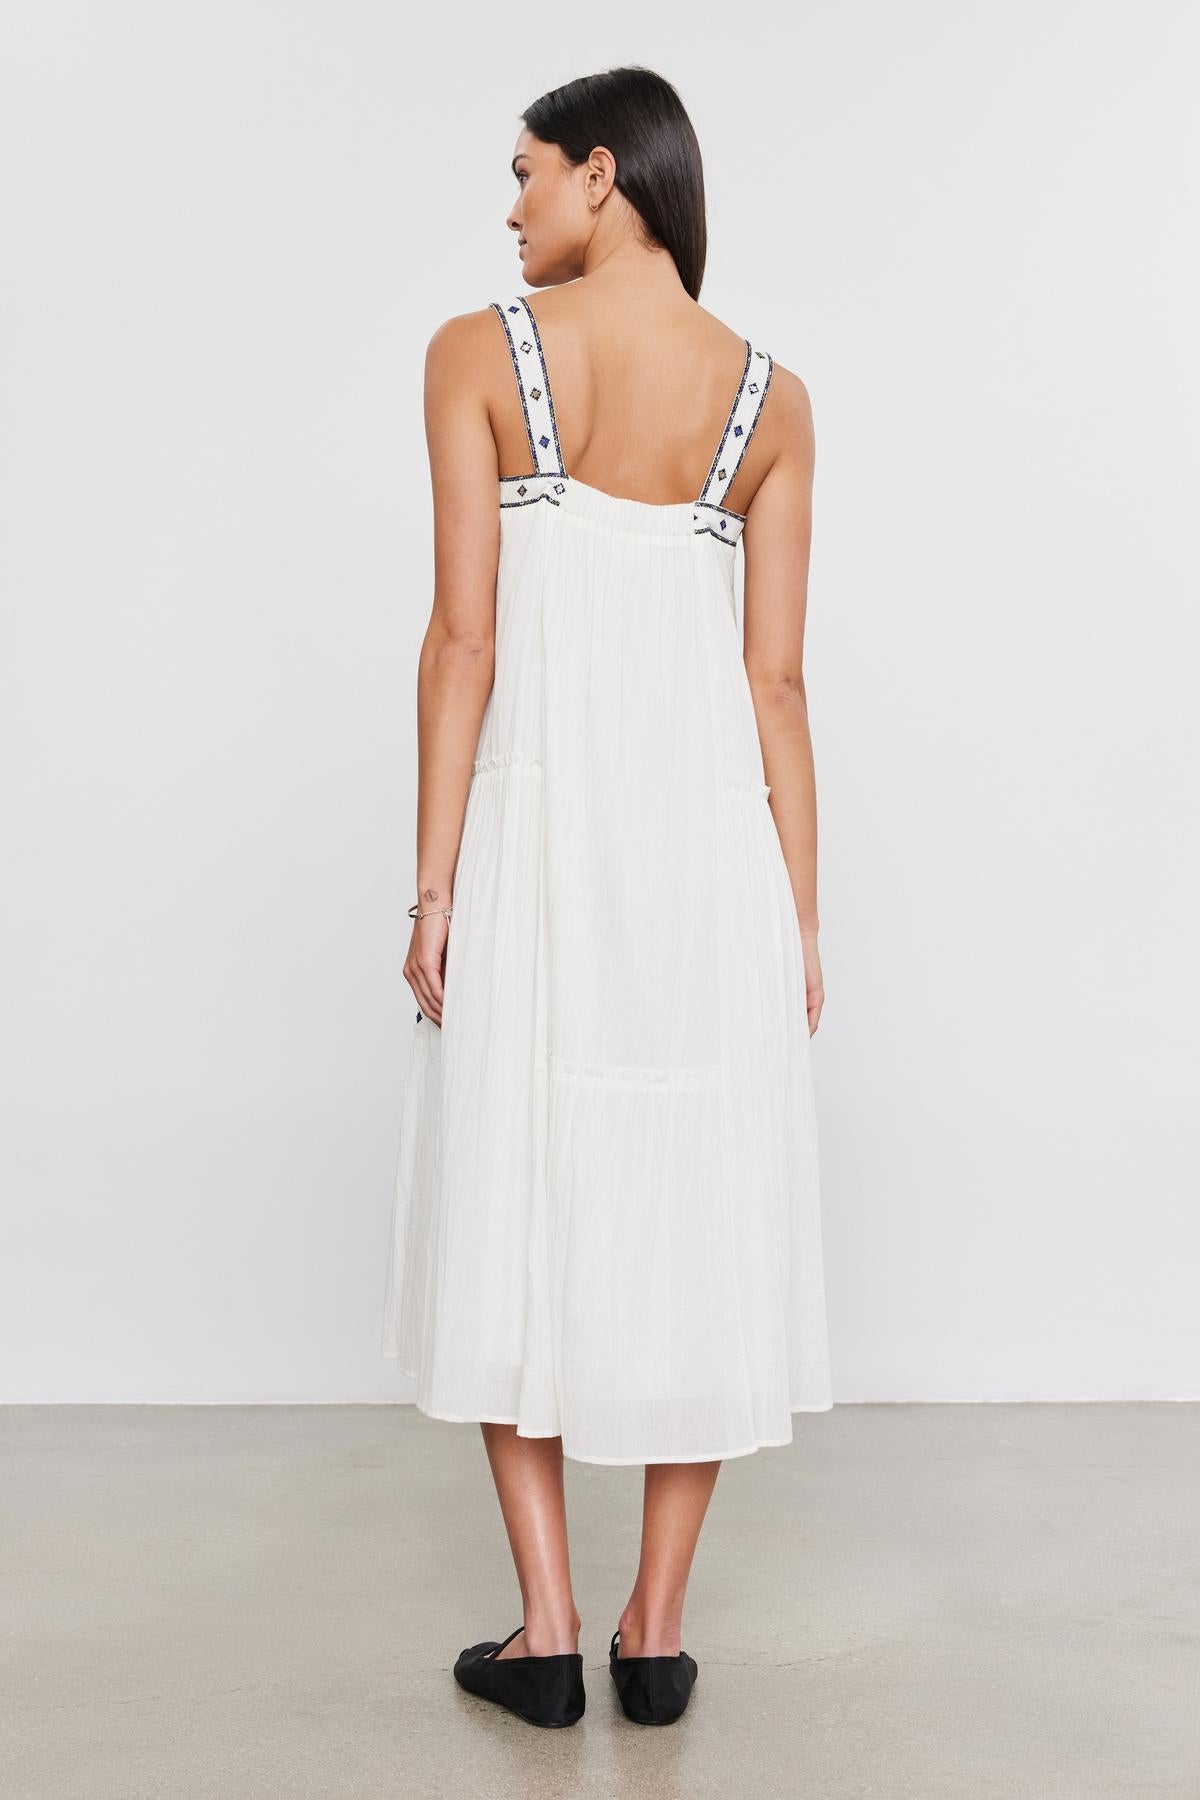 Woman in a white mid dress with decorative straps, standing facing away from the camera, on a plain background wearing the Riley dress by Velvet by Graham & Spencer.-36752942432449